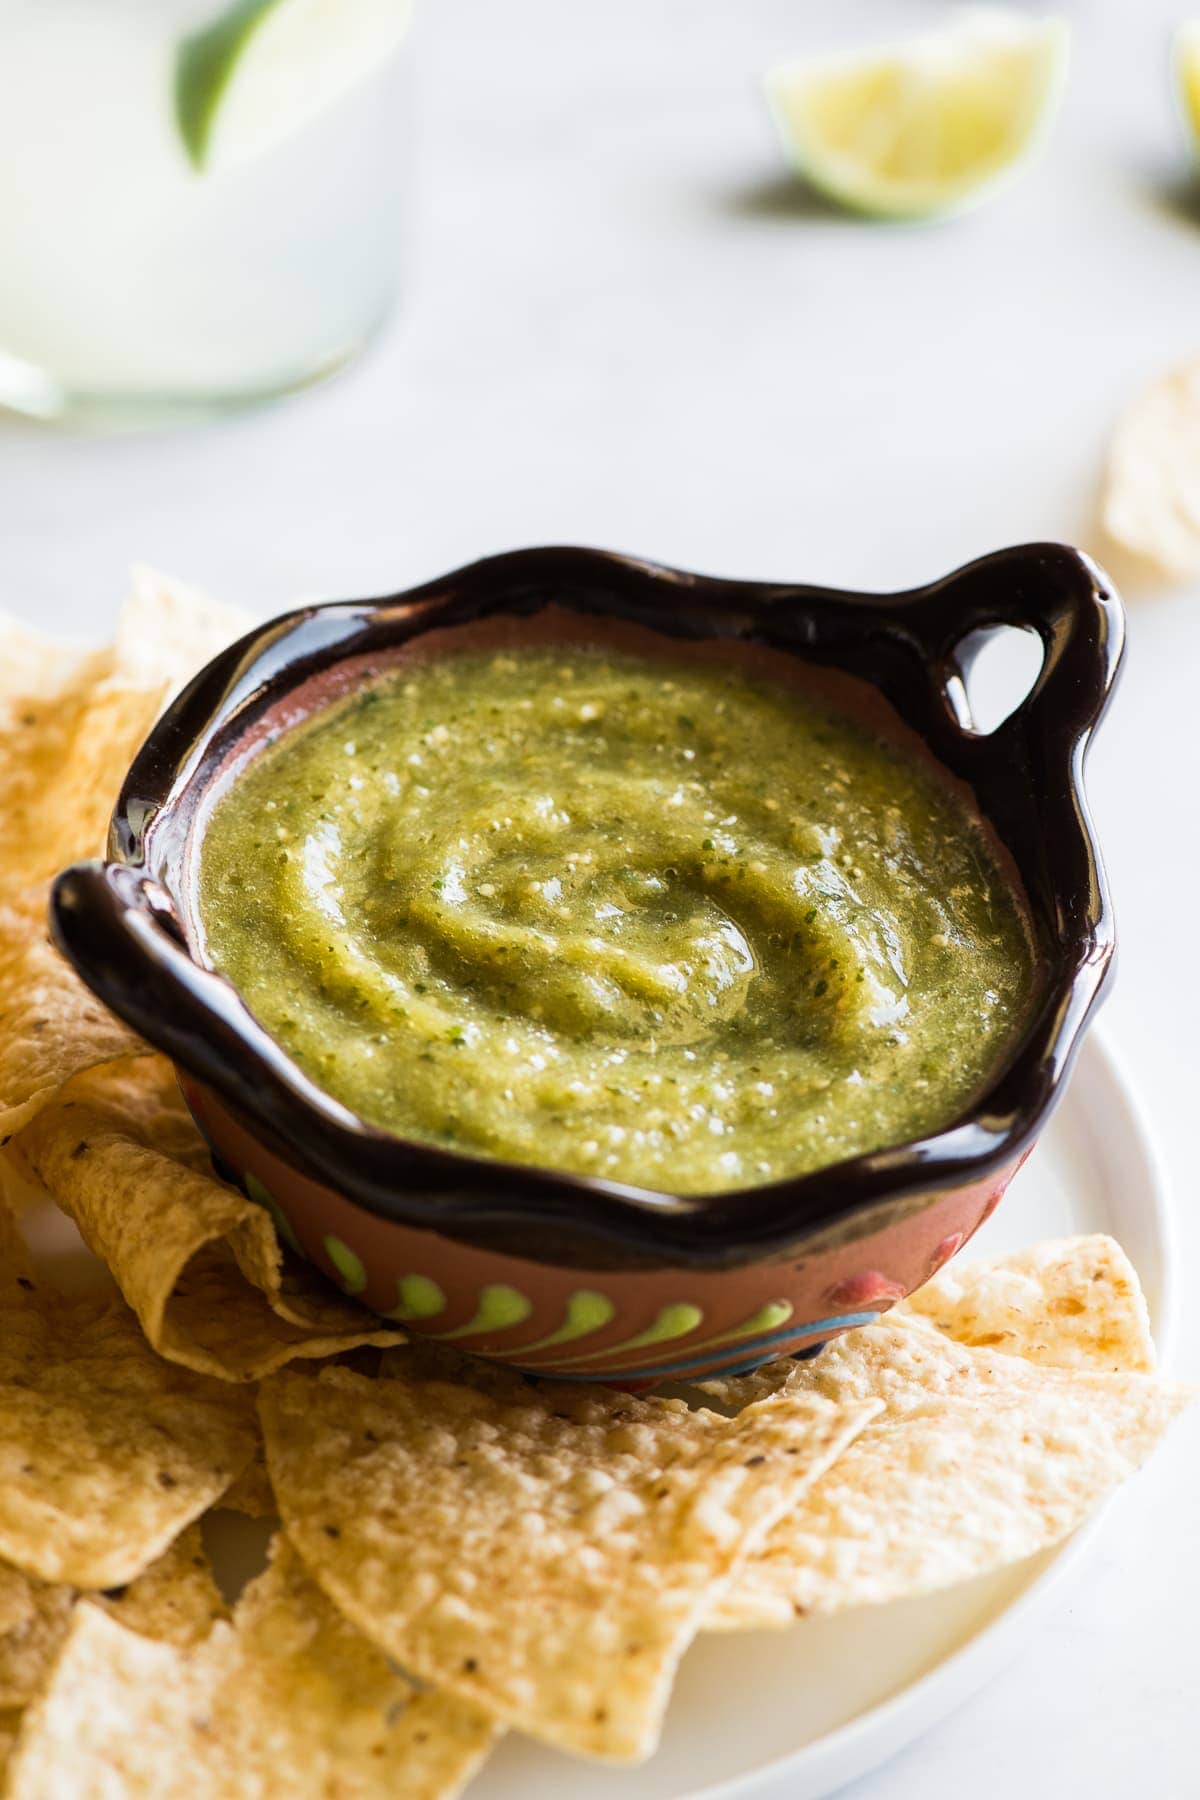 Salsa verde in a Mexican bowl next to some tortilla chips.